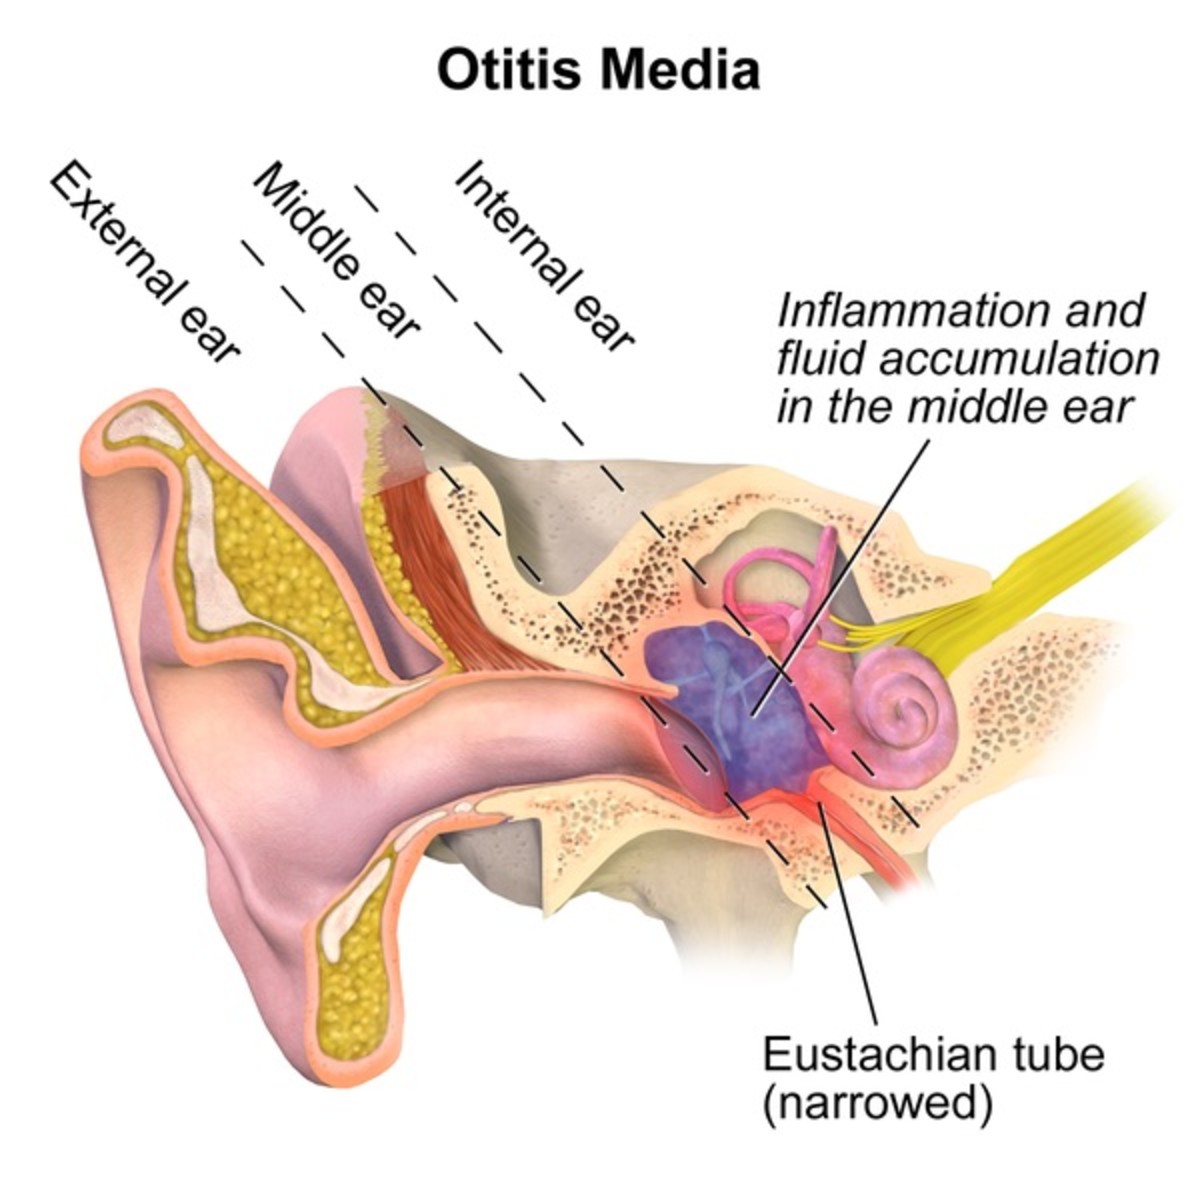 Fluid accumulation in the middle ear in otitis media